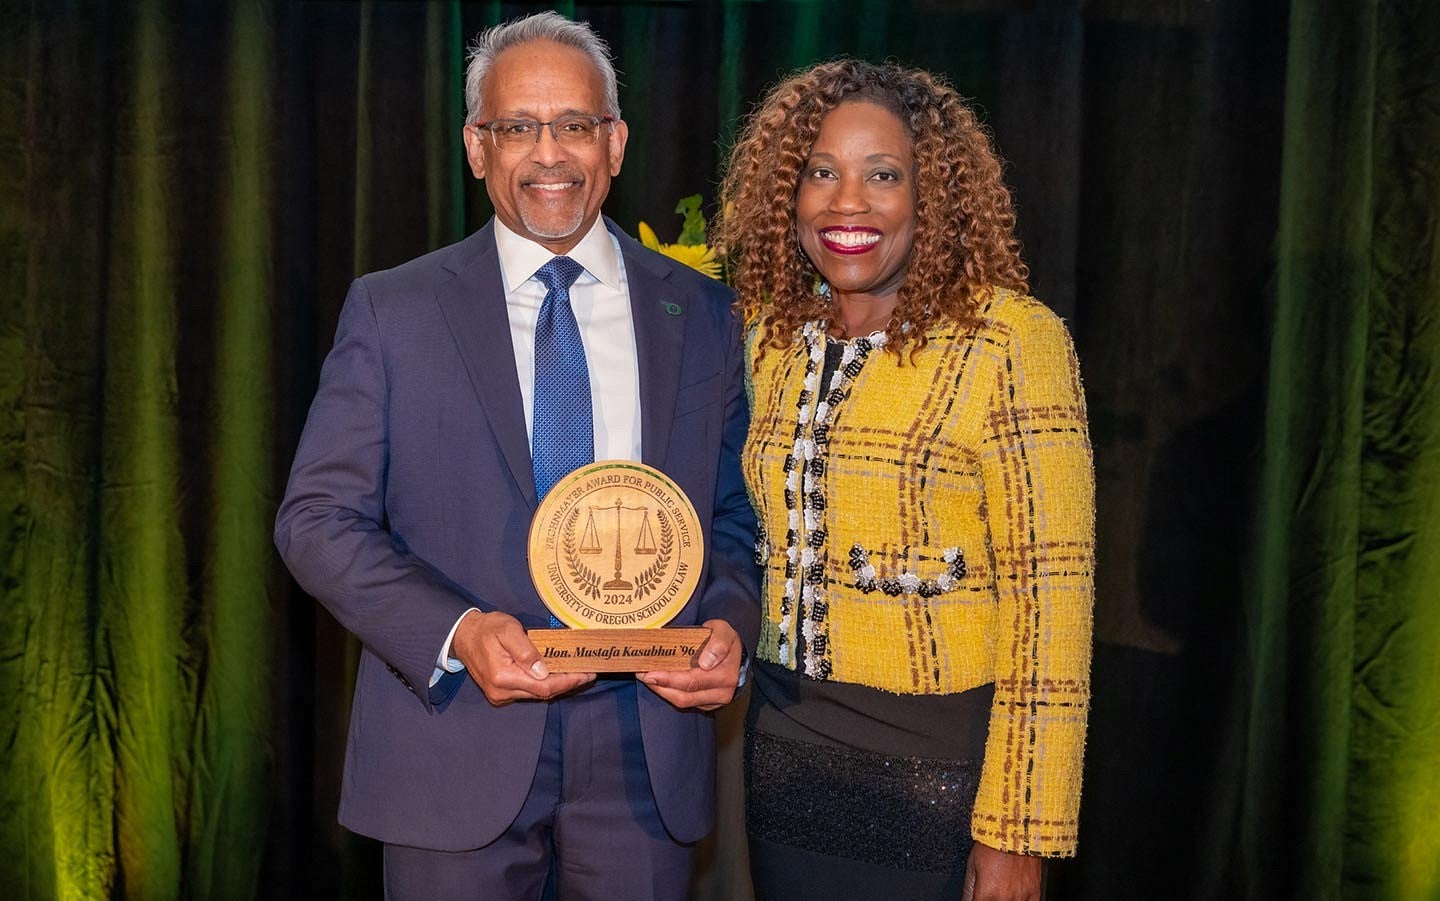 Judge Mustafa T. Kasubhai holding the Frohnmayer Award, standing next to Dean Marcilynn Burke in front of a green curtain.